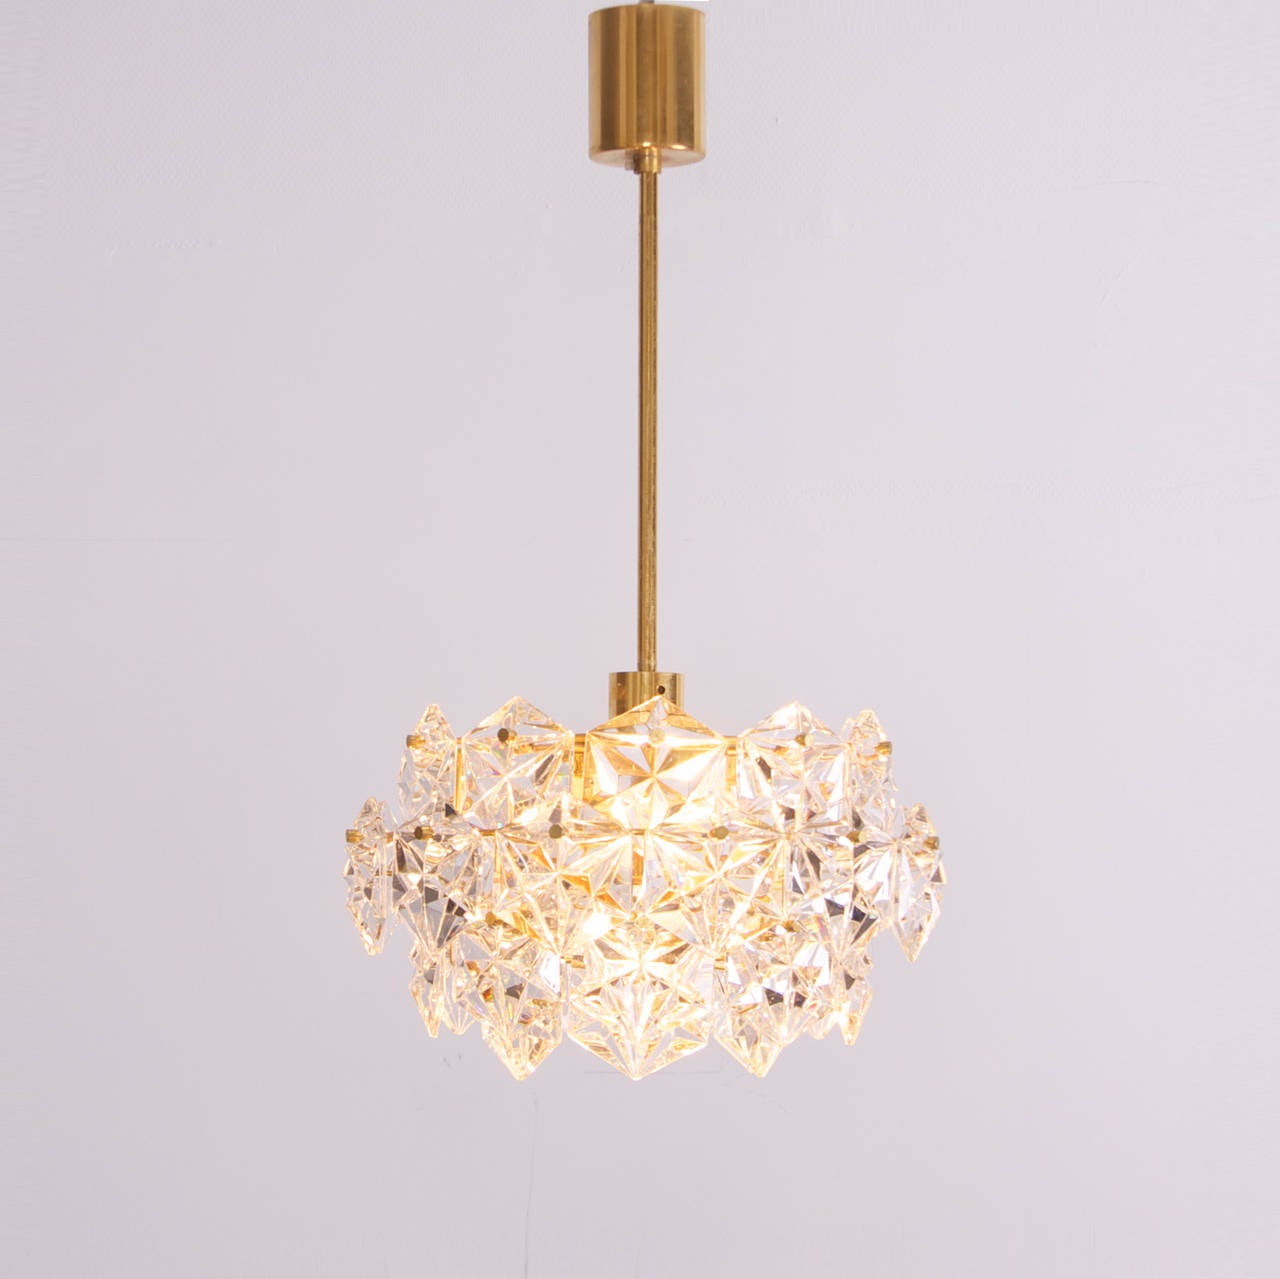 Stunning four-tier chandelier by Kinkeldey with huge gem-like crystals and gold-plated brass frame.

Same lamp in other sizes are also listed.

Takes four bulbs.
To be on the the safe side, the lamp should be checked locally by a specialist